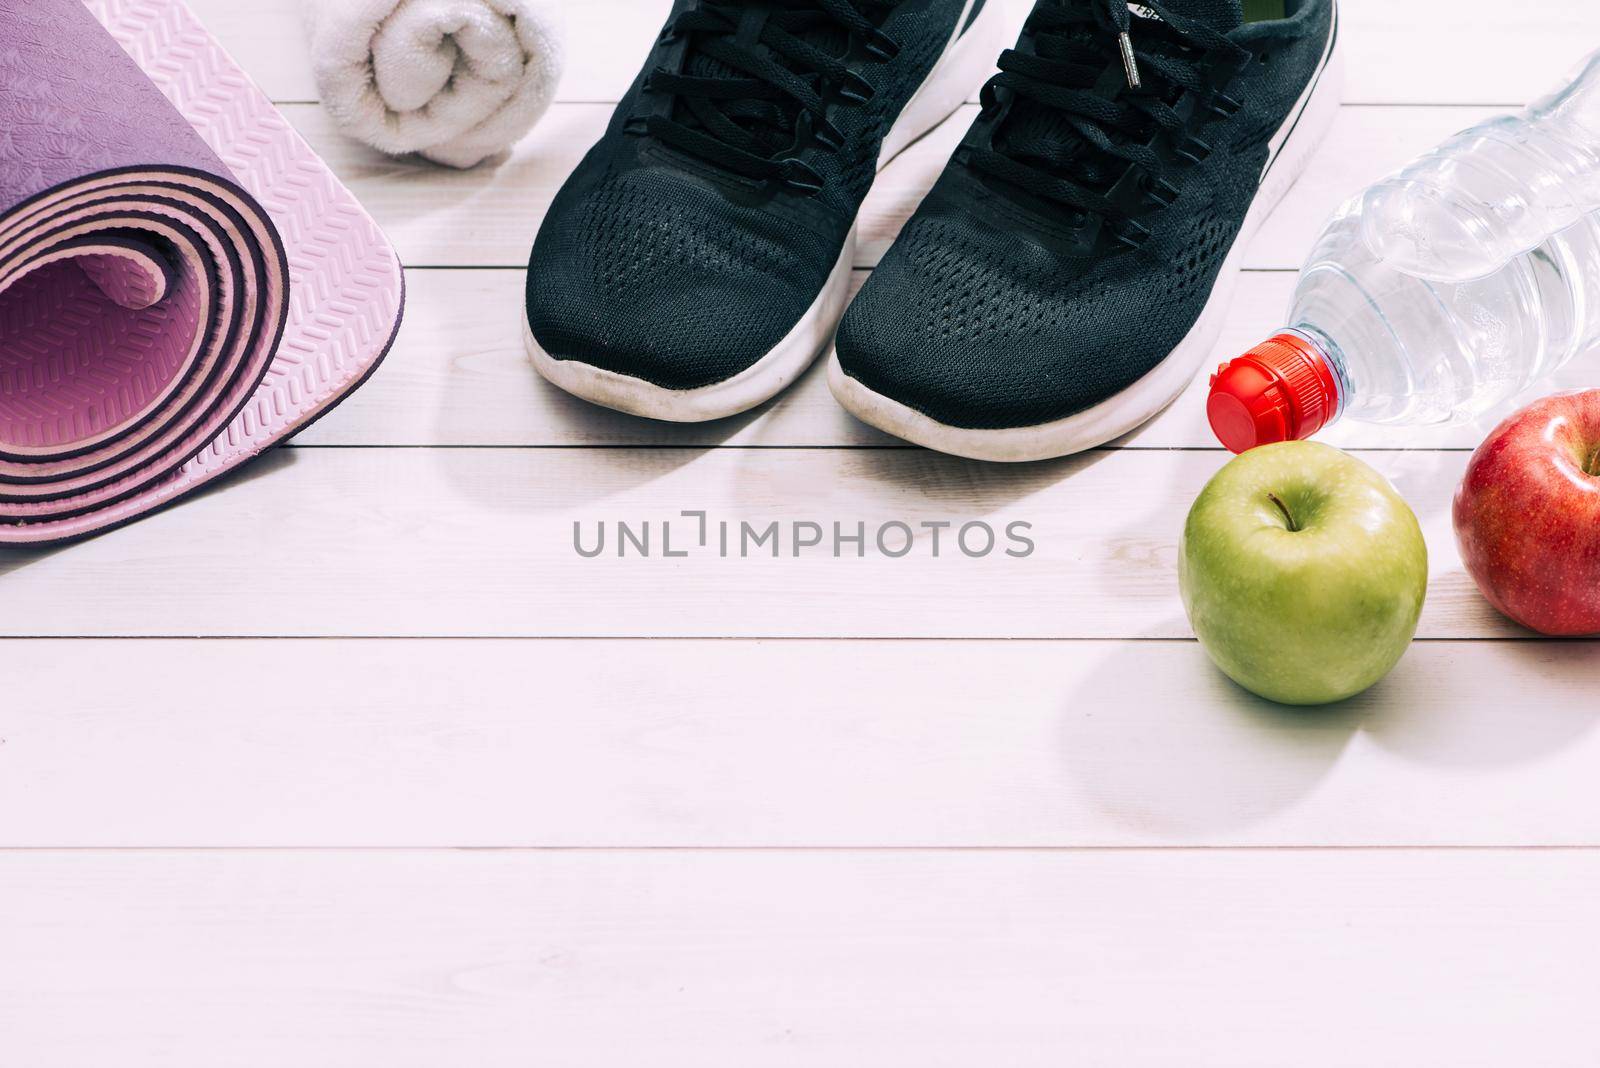 Ladies Sports Accessories such as trainers shoes, dumbbells, yoga mat with water and apple. Fitness, sport and healthy lifestyle concept. Top view, copy space